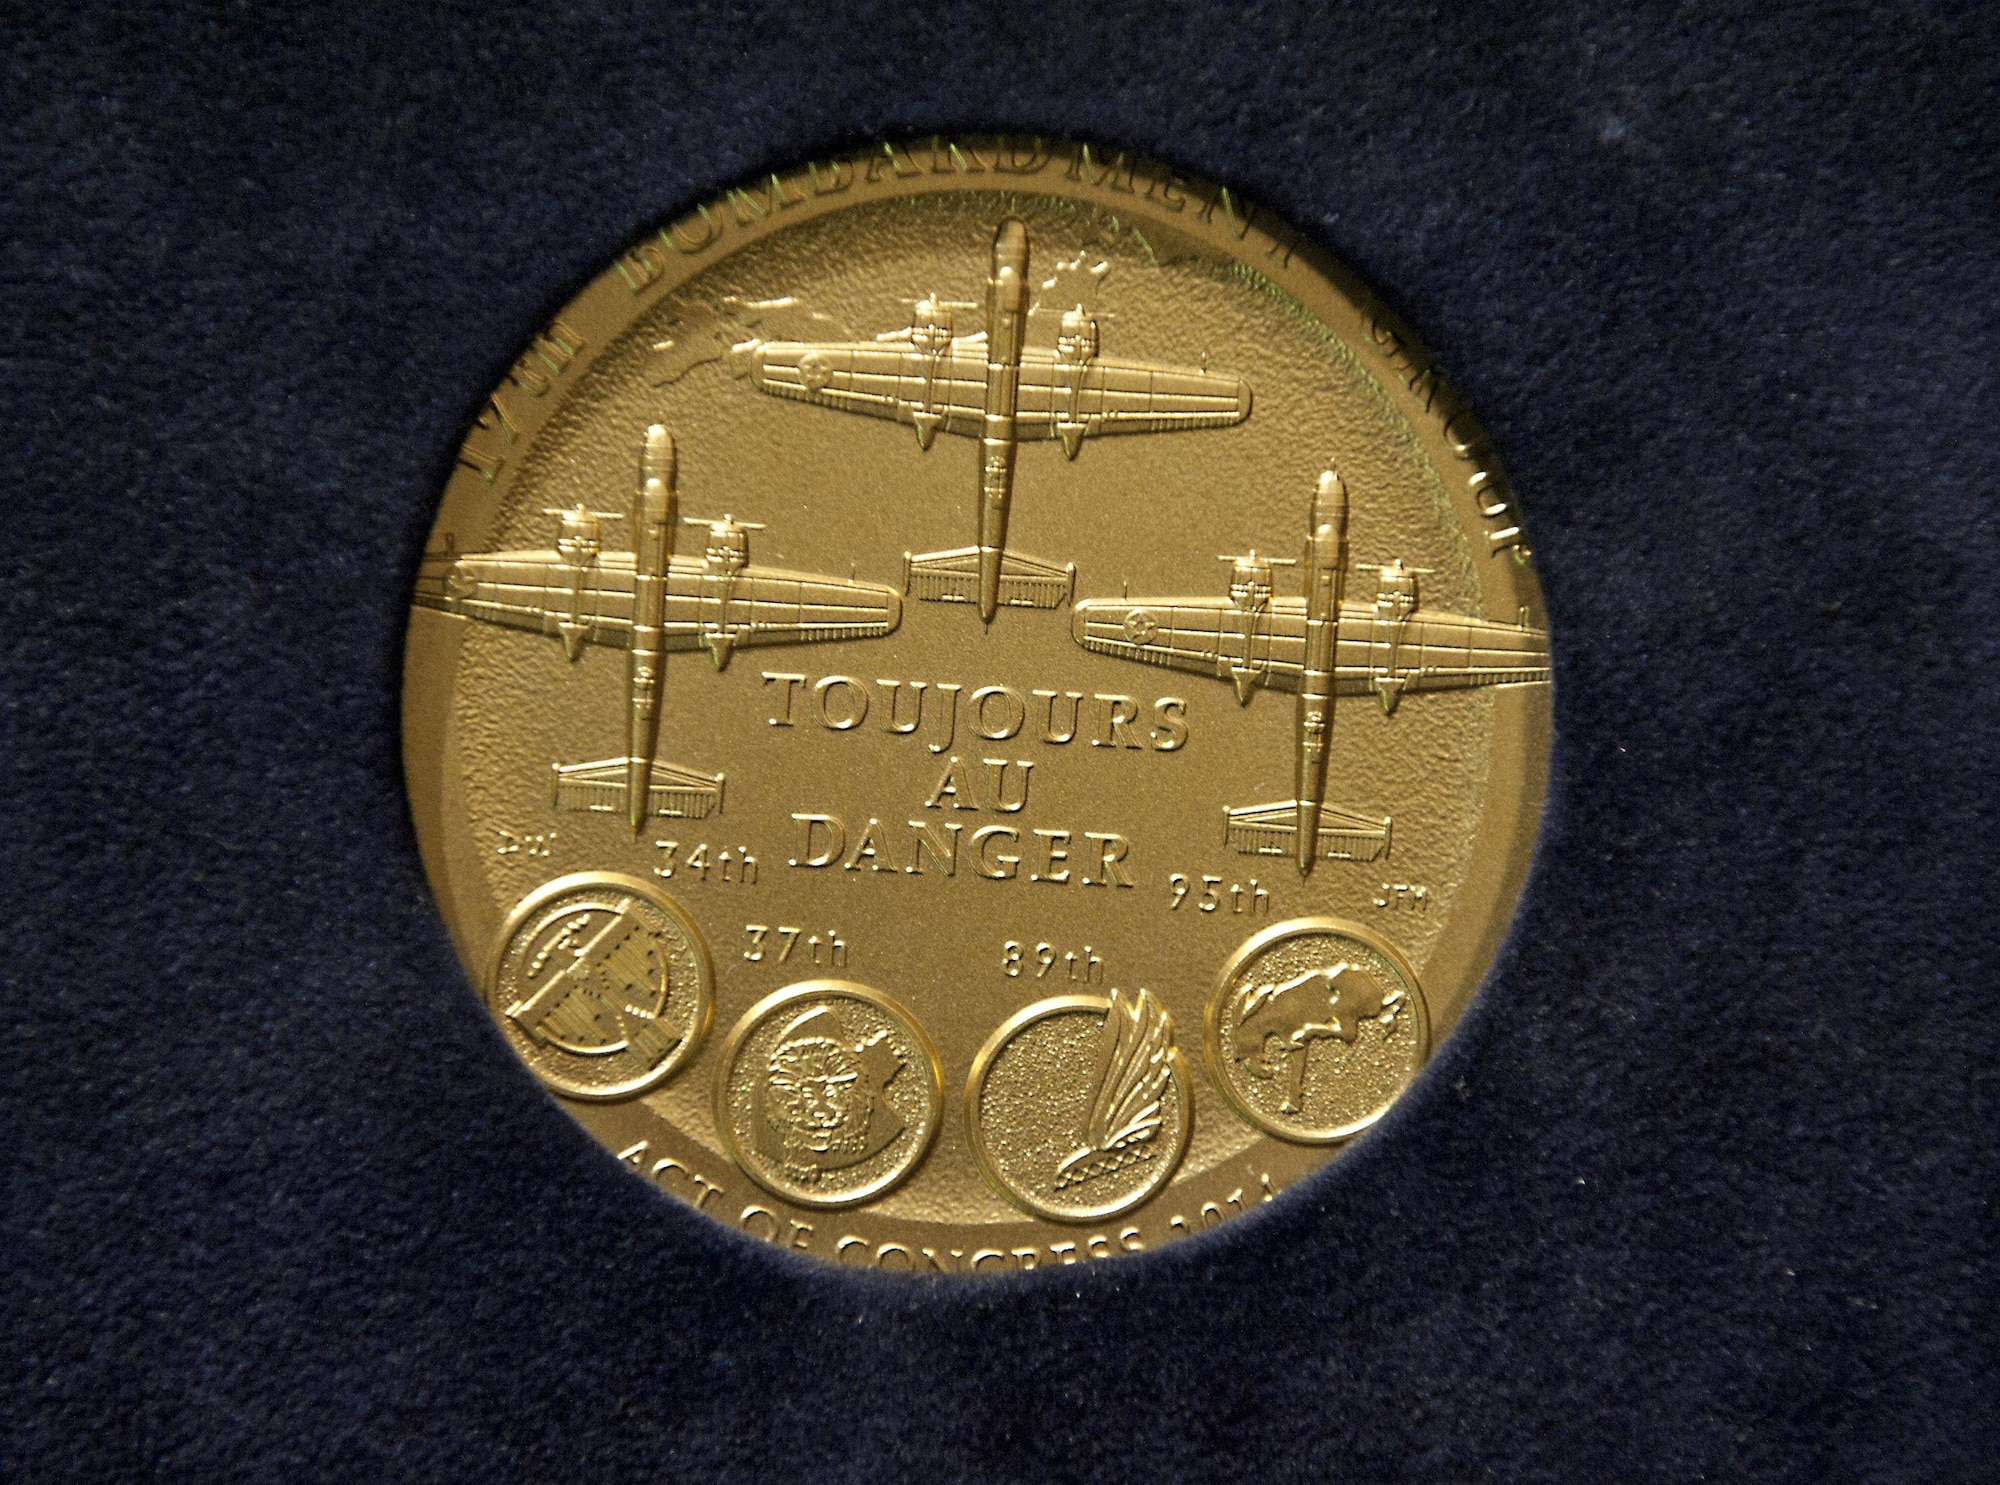 Congressional Gold Medal awarded to the Doolittle Raiders – a group of 80 U.S. airmen who flew a mission into Japan on April 18, 1942 – for their extraordinary service during World War II.